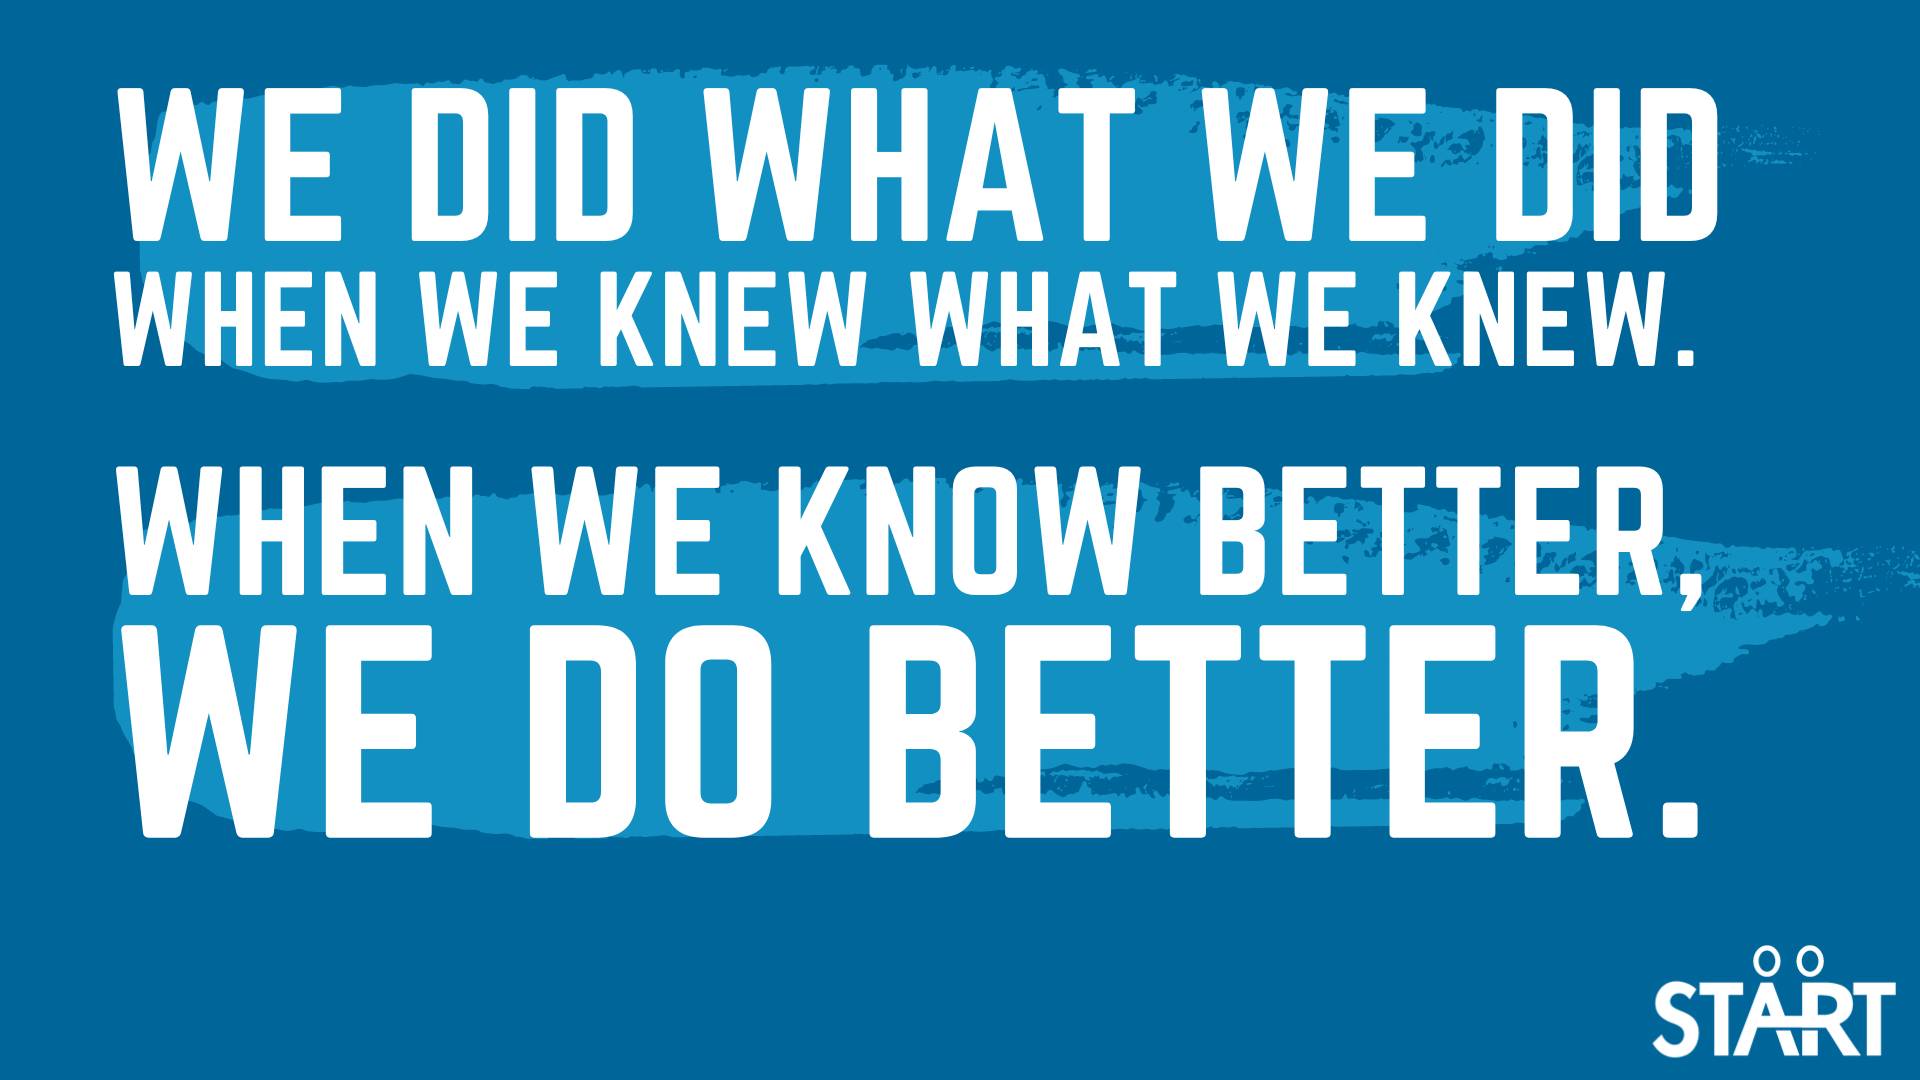 We did what we did when we knew what we knew. When we know better, we do better.